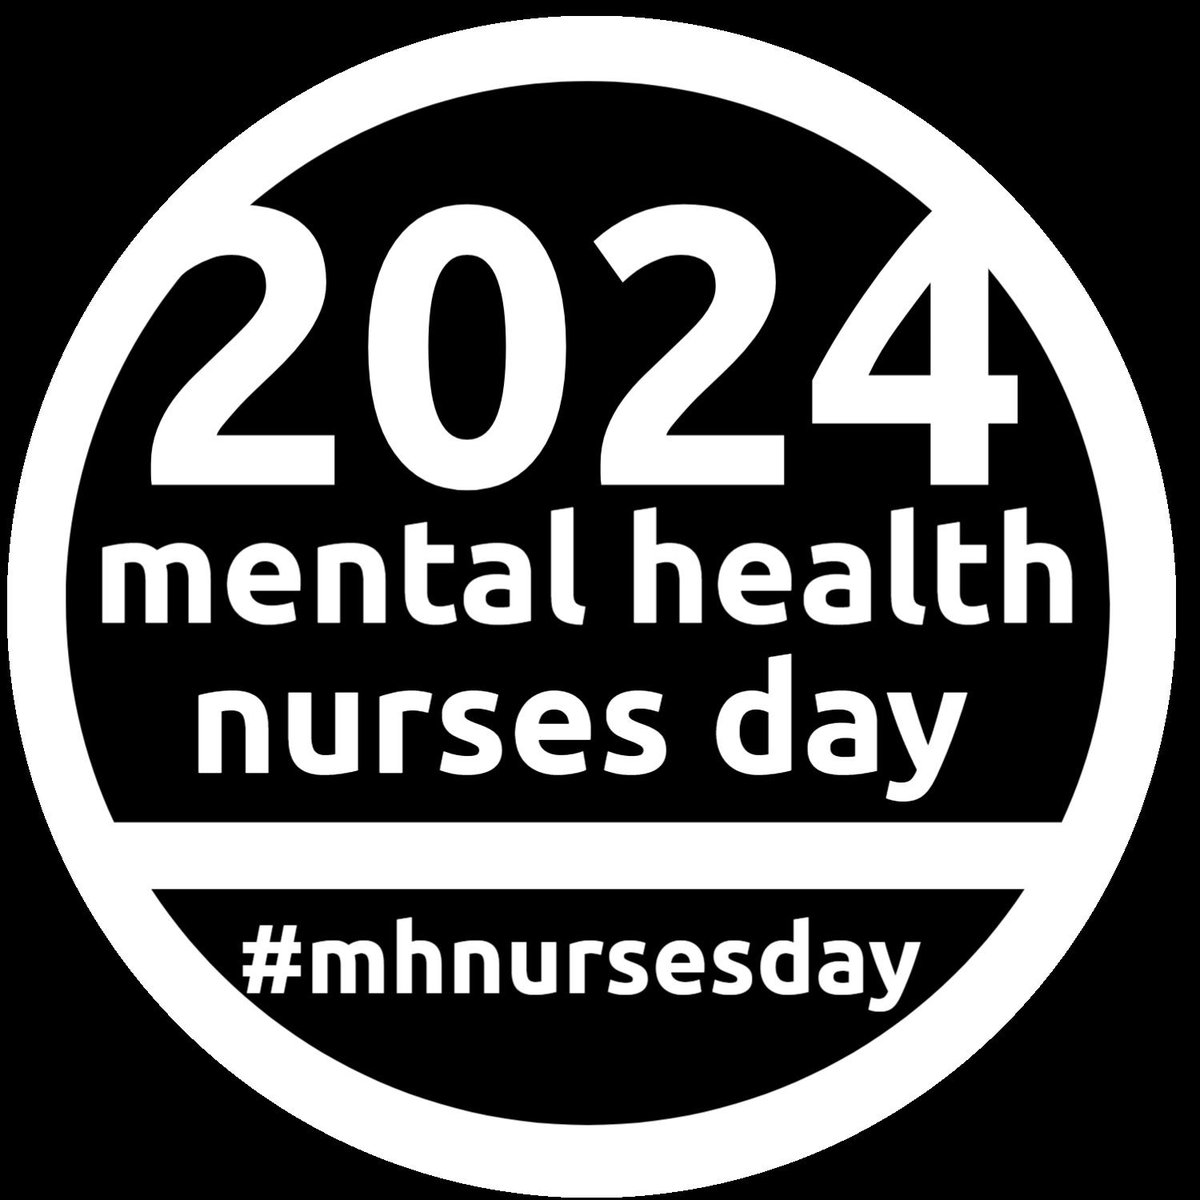 Happy #MentalHealthNursesDay to our amazing teams across @NHSGGC thank you for all you do every day to make a difference @Profawallace @LorraineCribbi2 @GCHSCP